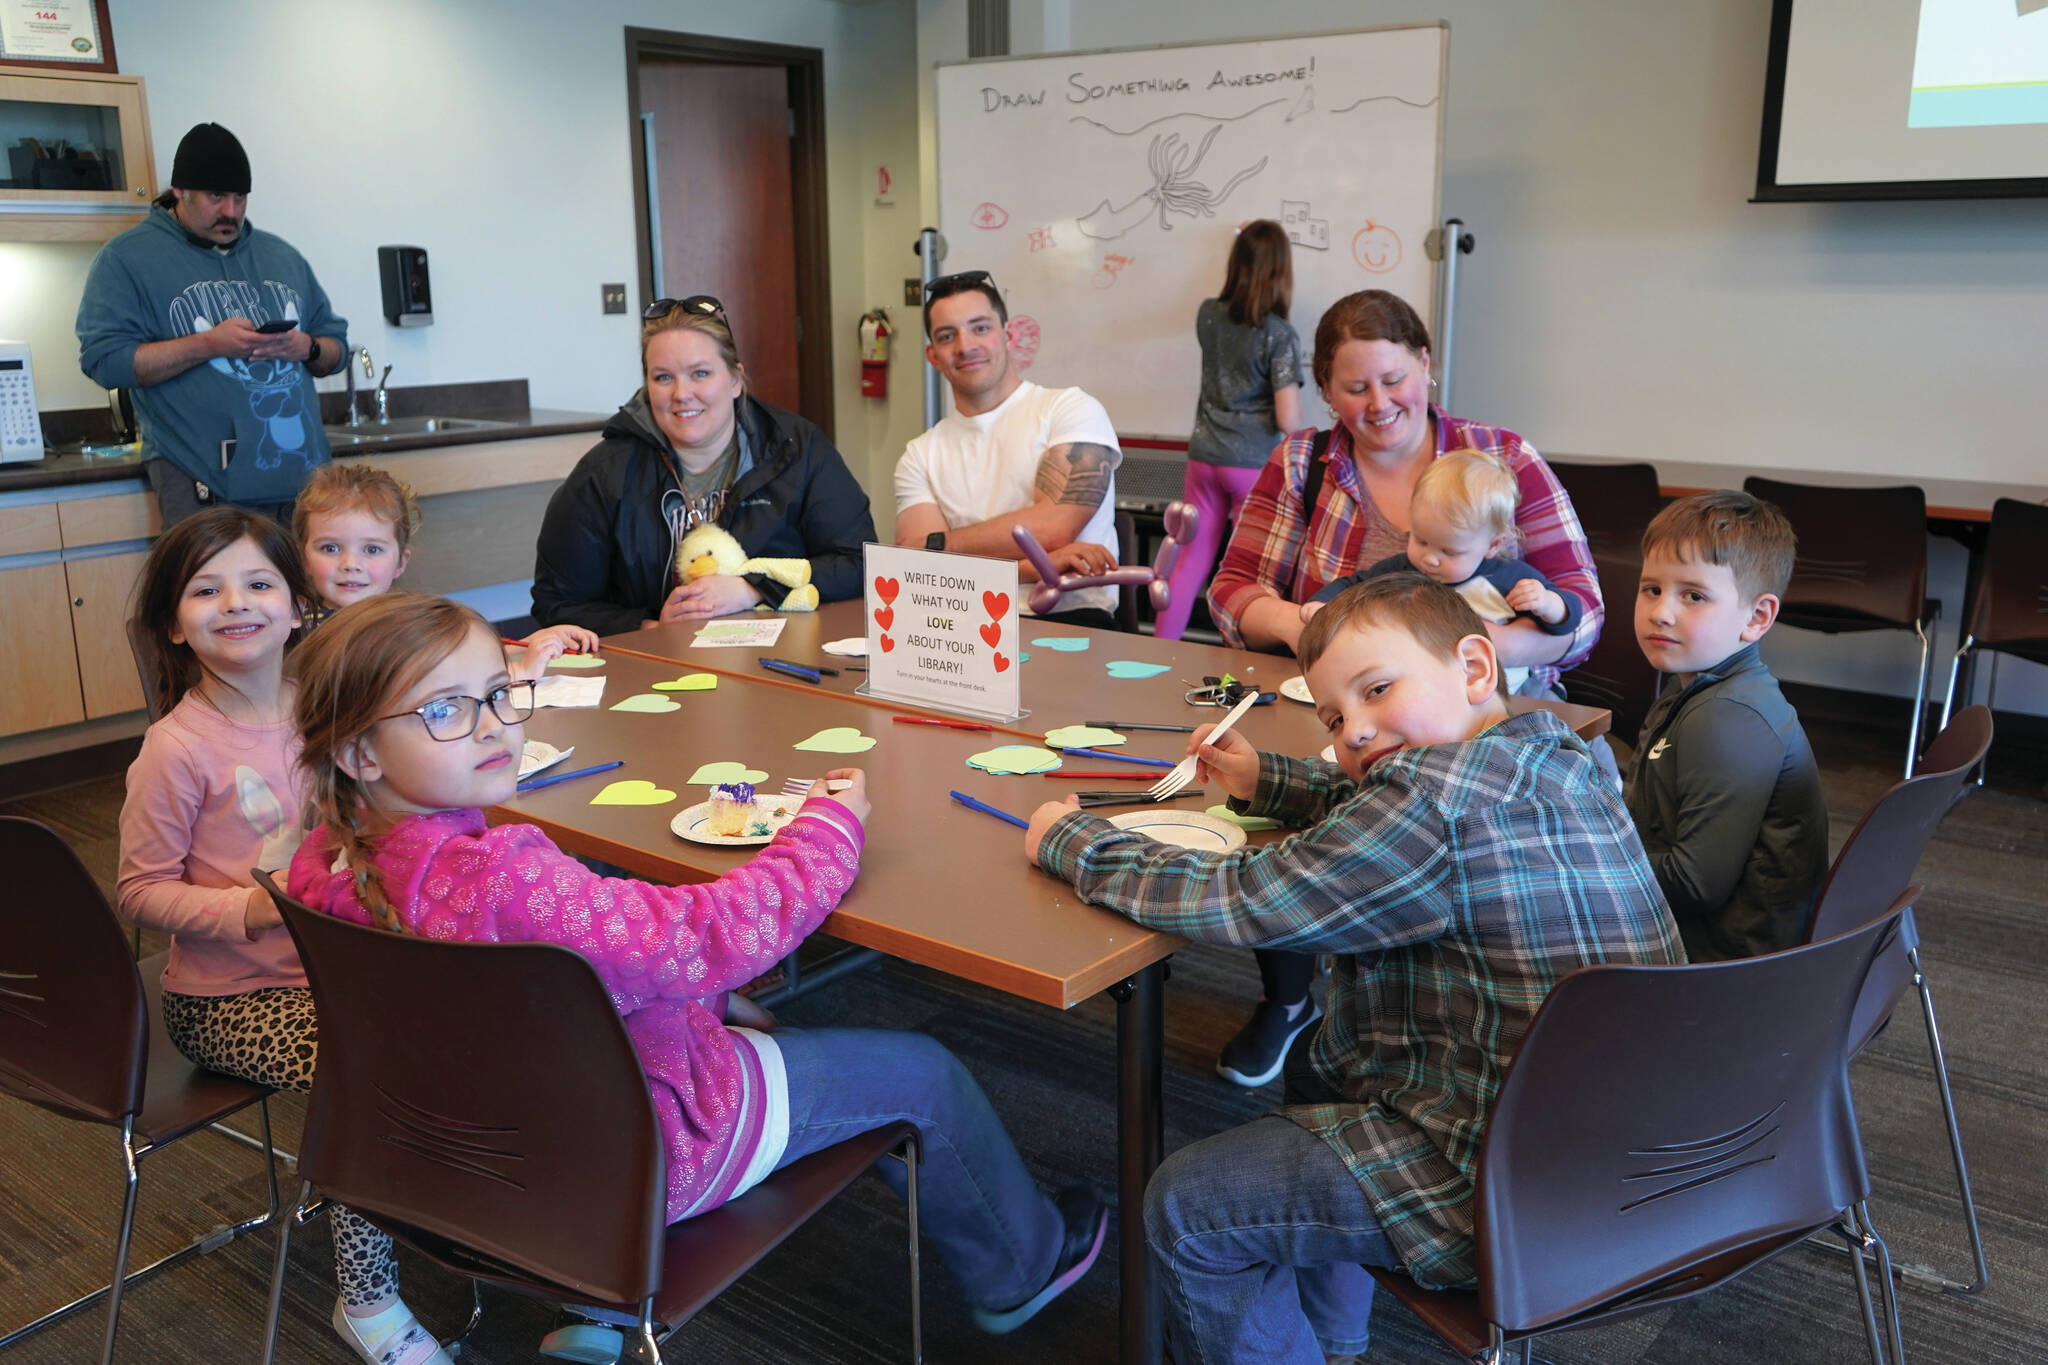 Jake Dye/Peninsula Clarion
Children and families gather around a table to eat cake and write down what they love about their library at a 10th anniversary celebration for the expansion of the Soldotna Public Library on Monday.